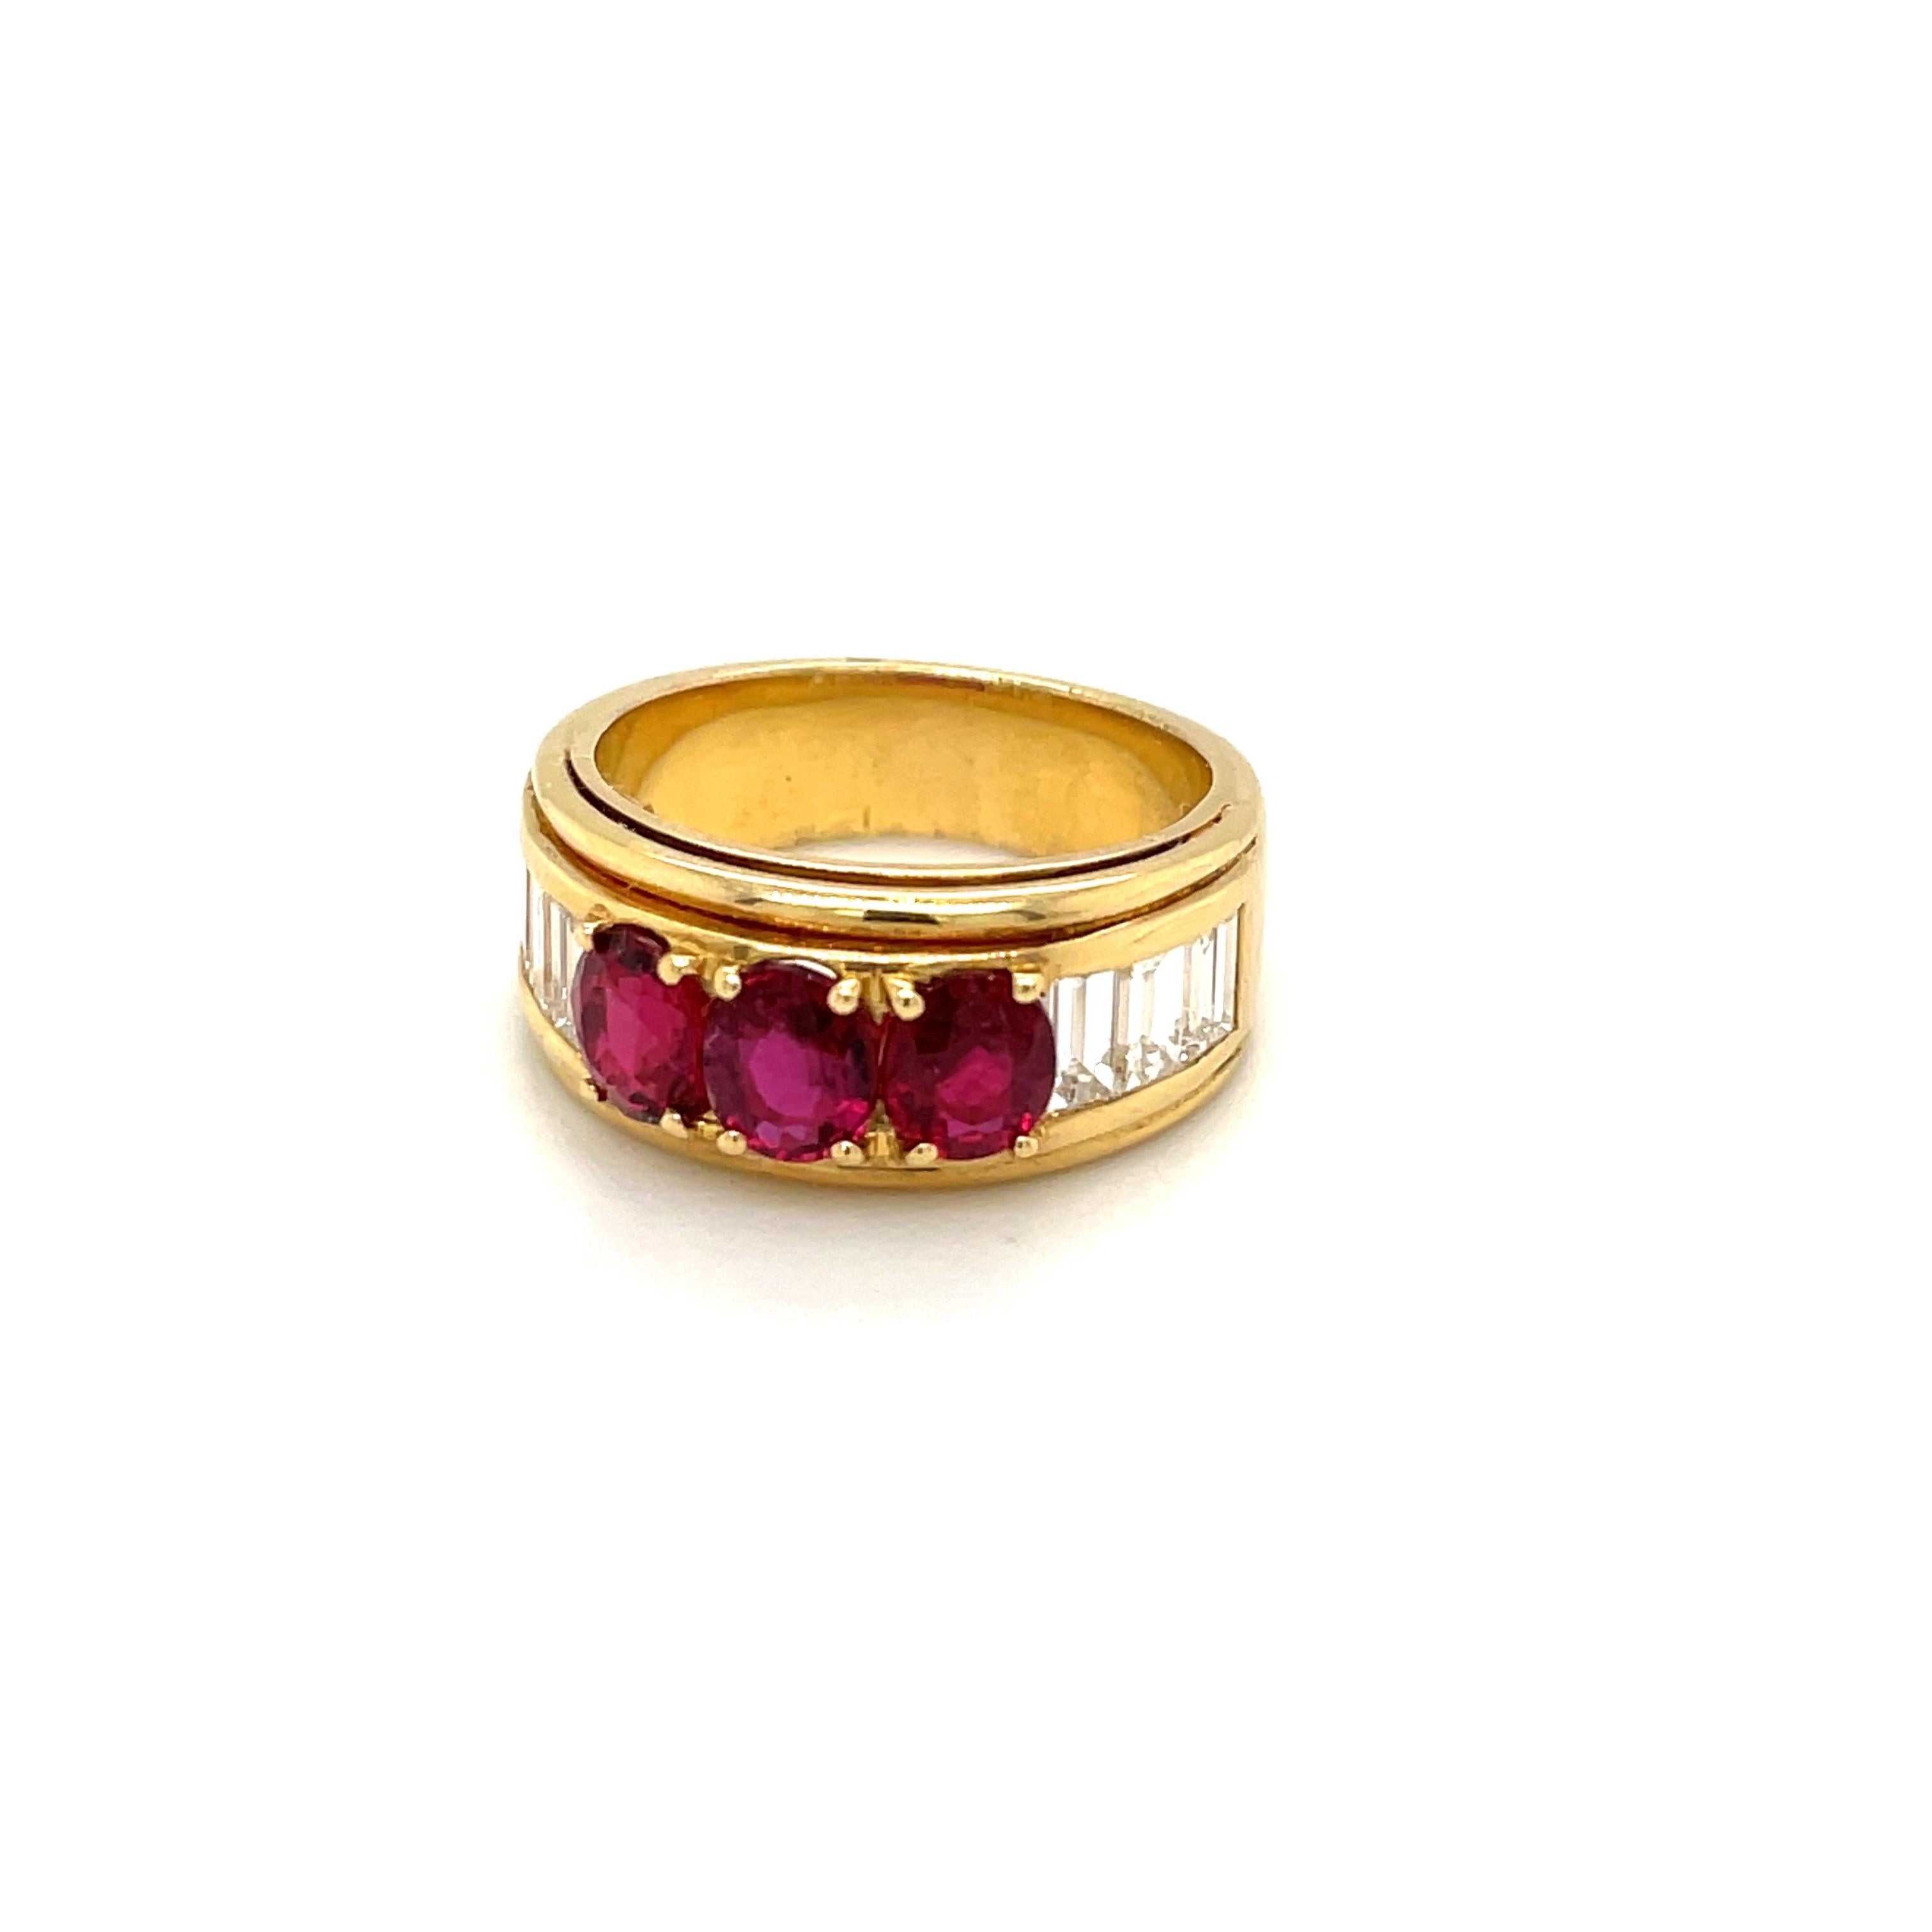 Crafted by the famed Italian designer Guiseppe Picchiotti, this ring is a perfect example of his meticulous work. Set in 18 karat yellow gold this ring features 3 oval rubies set across the top . Three baguette diamonds flank the rubies on either